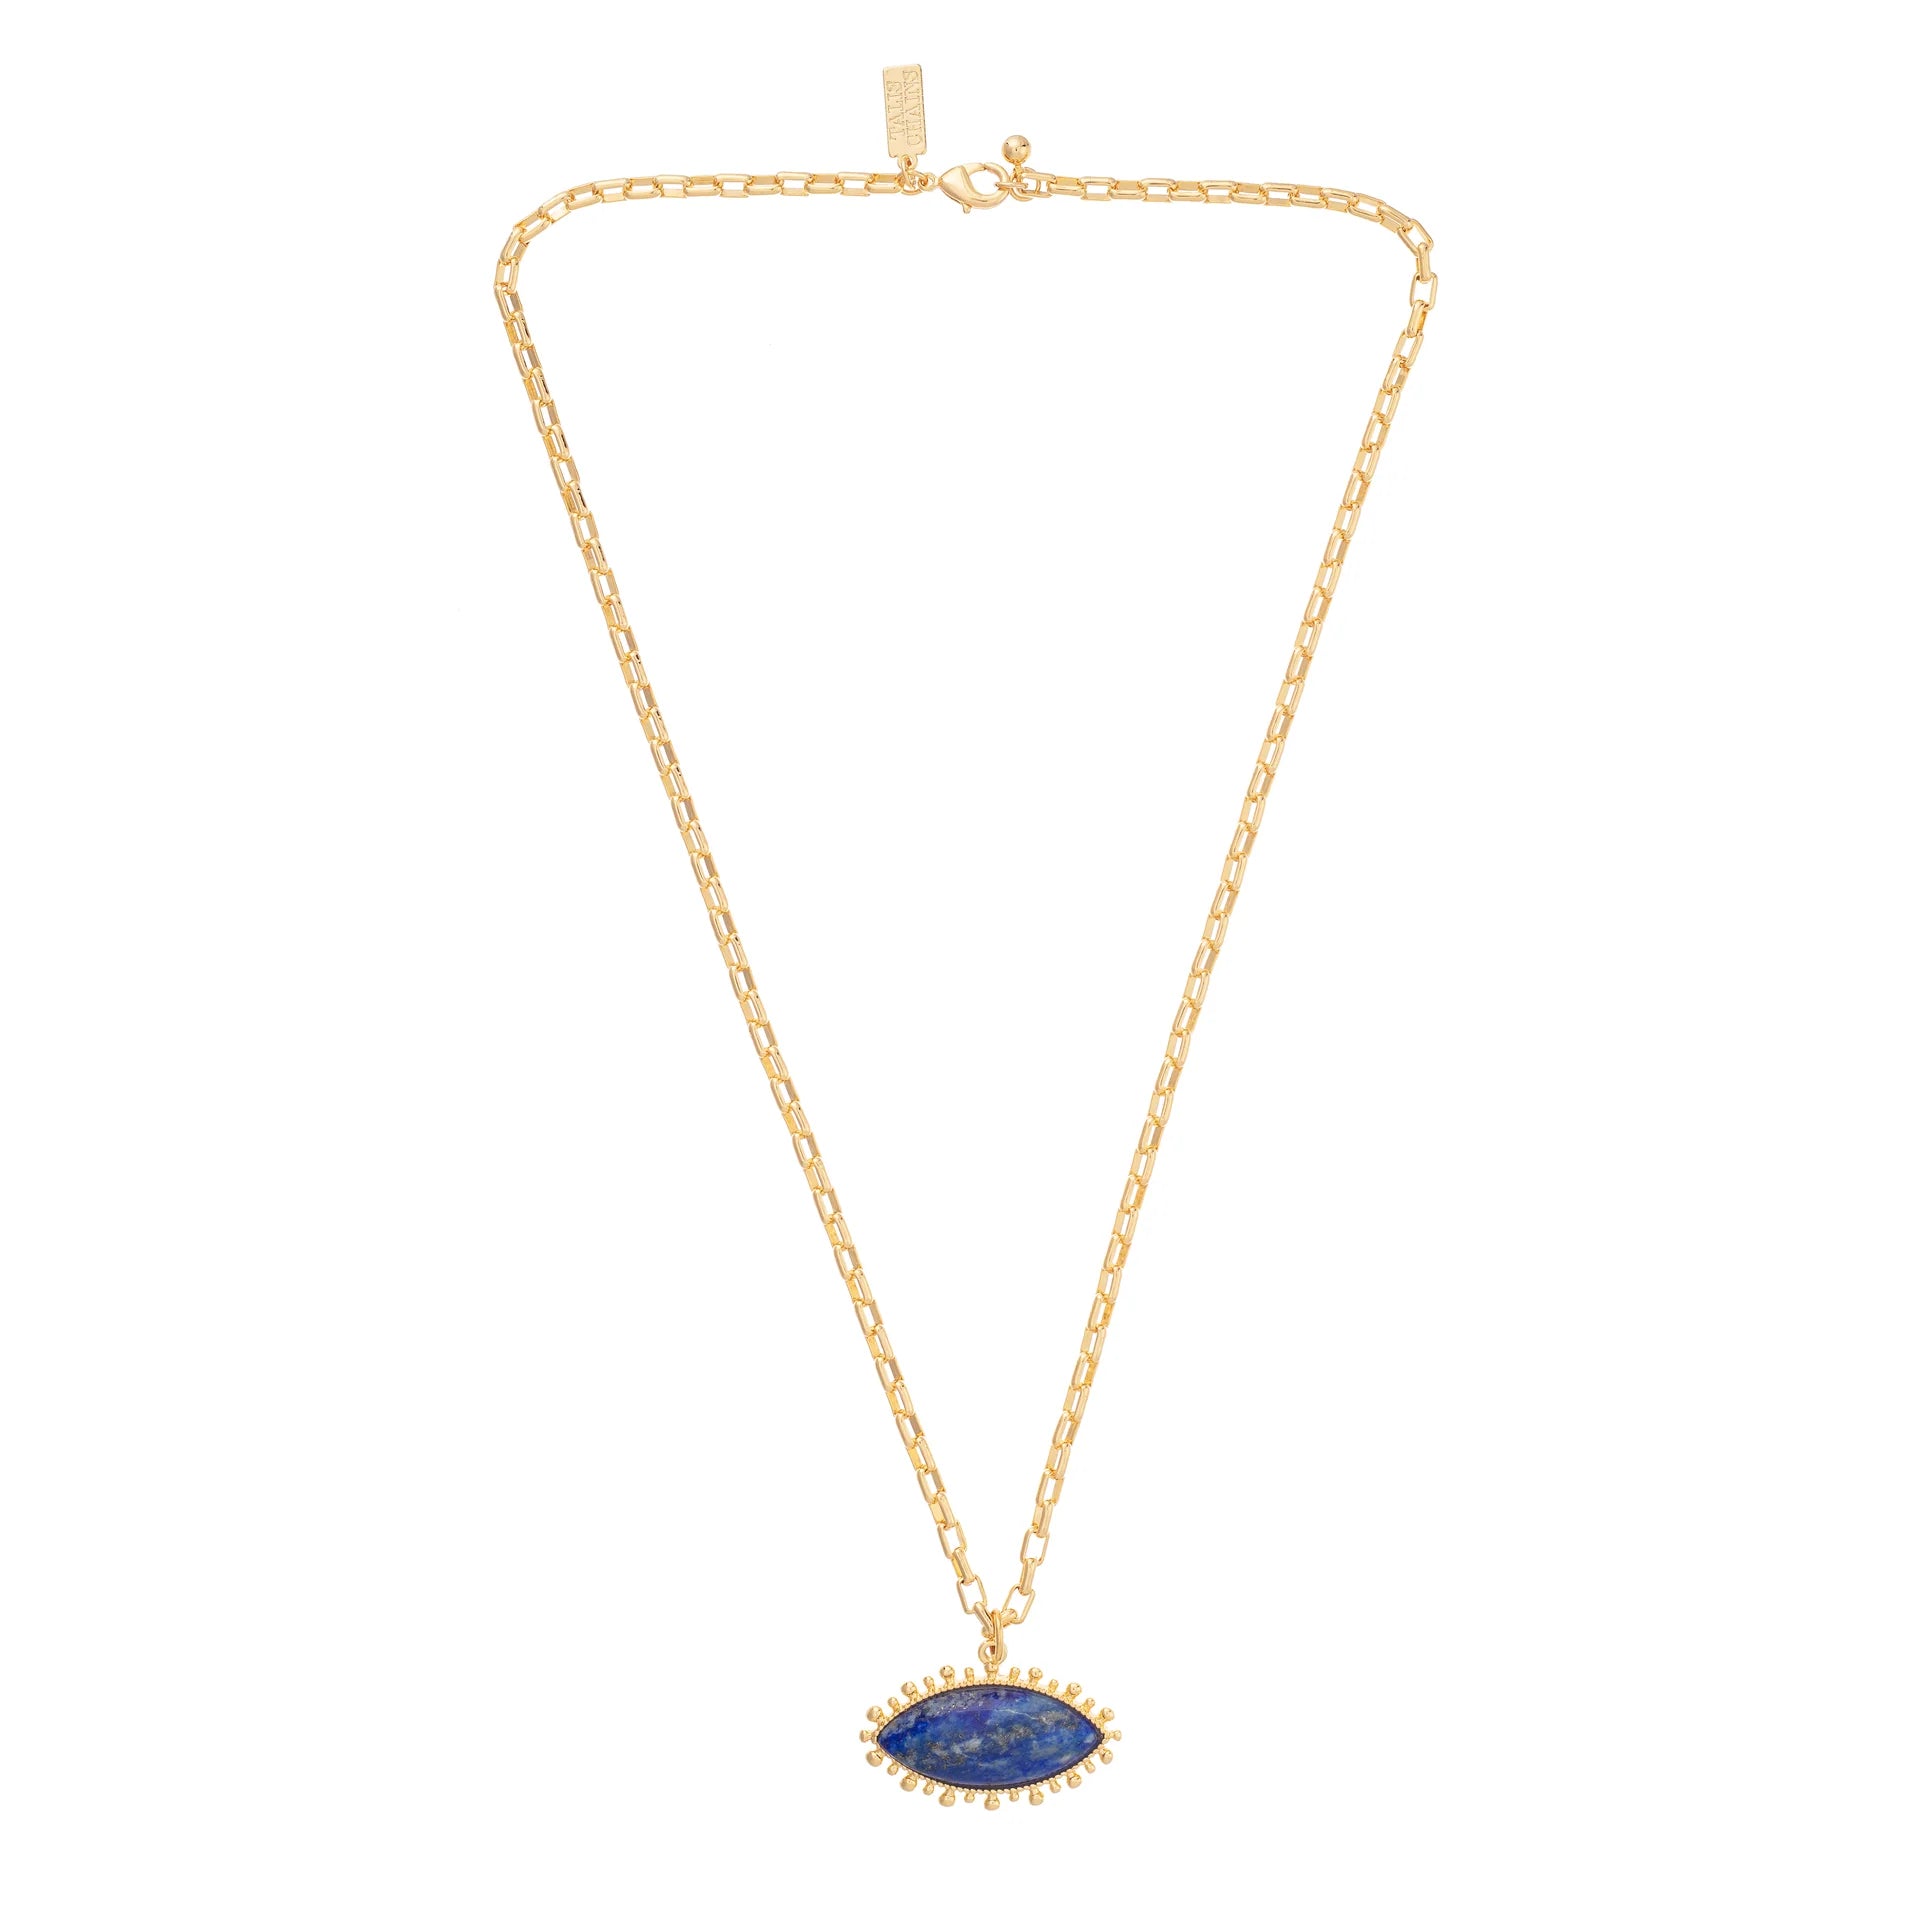 Evil eye pendant necklace from Talis Chains, celebrity jewellery brand 